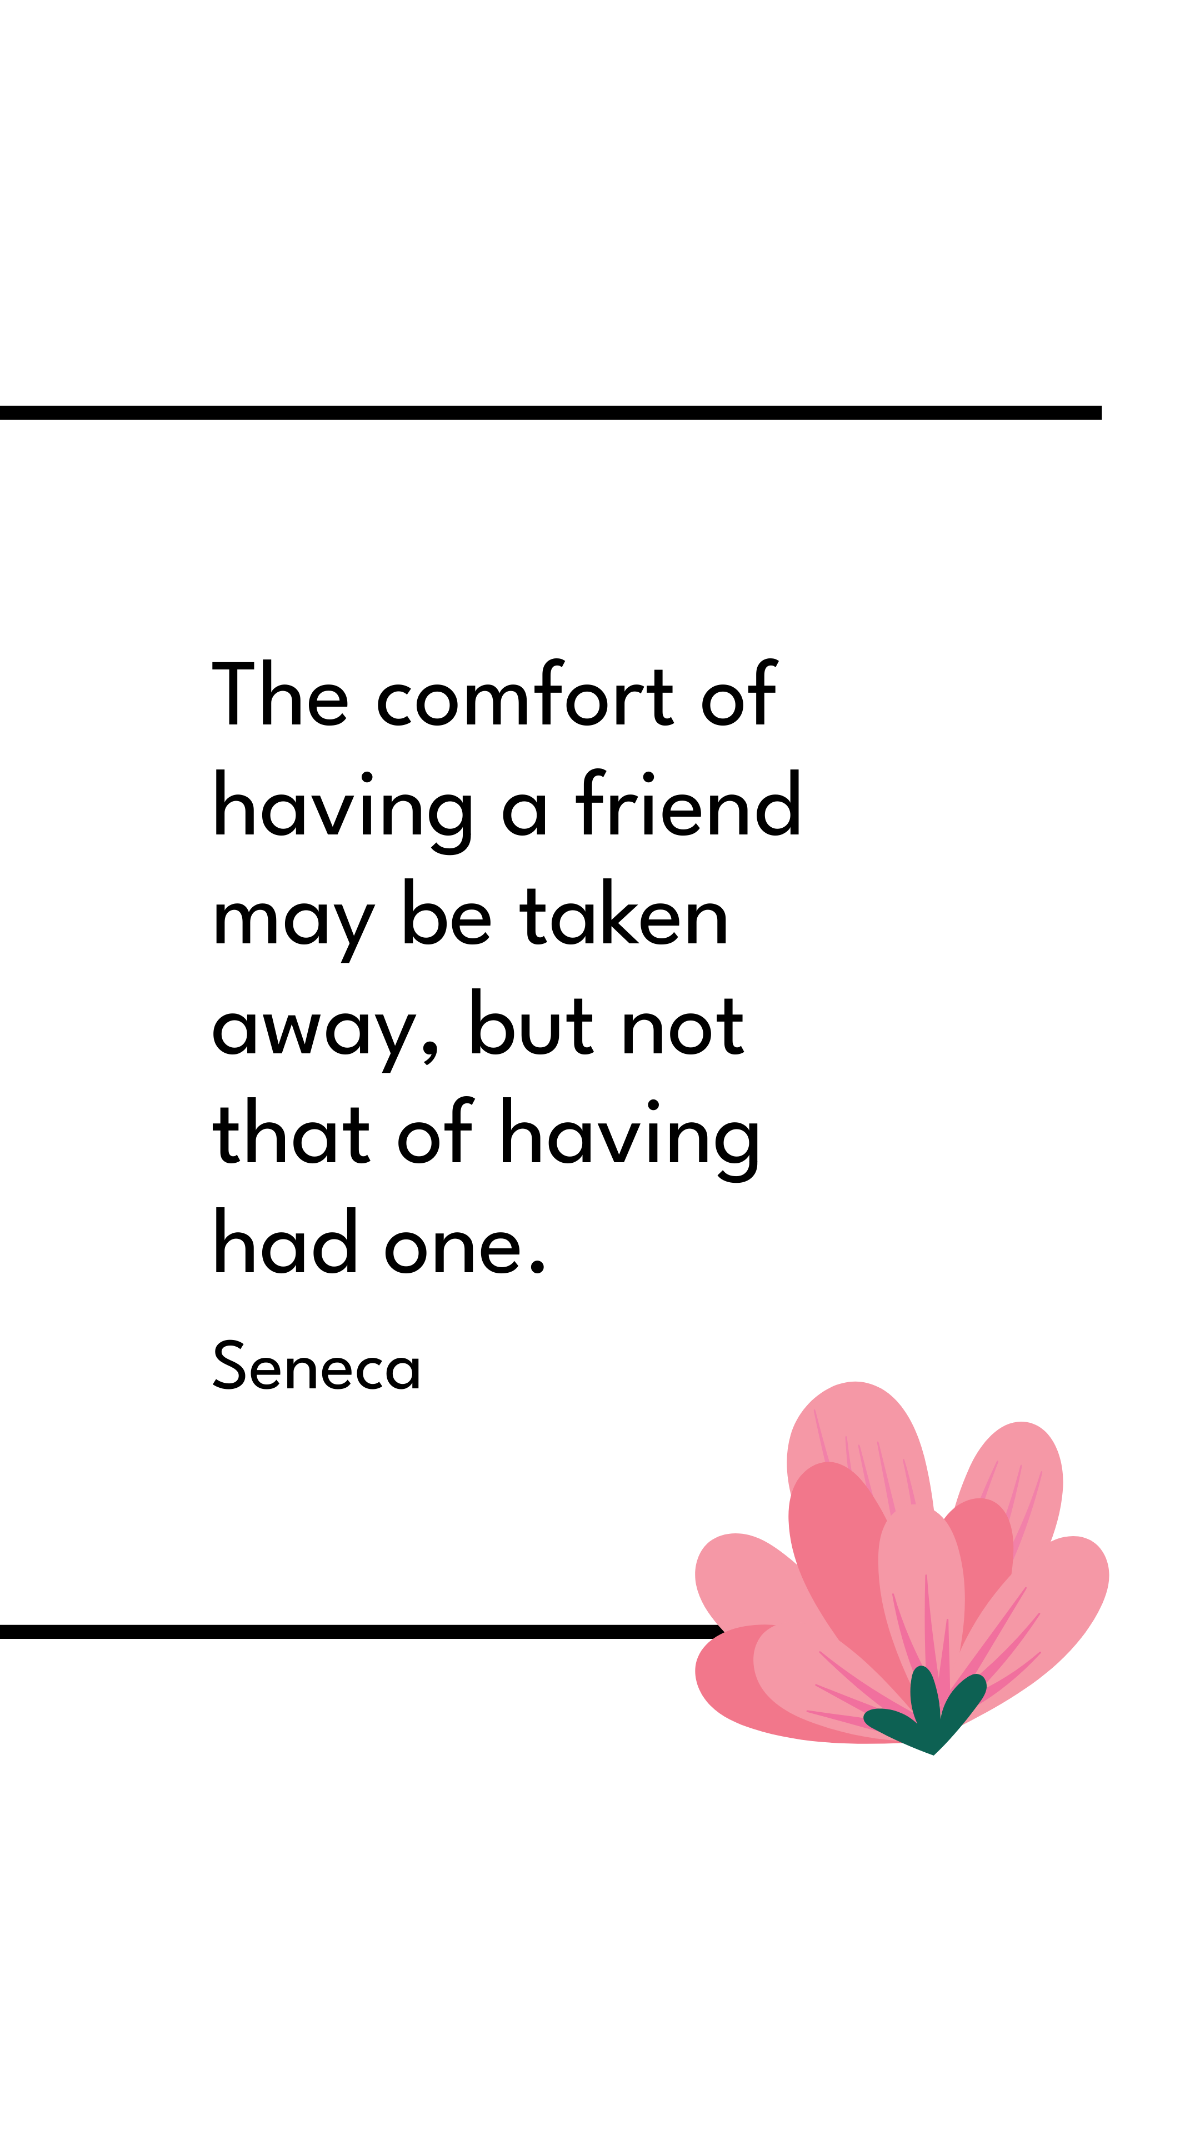 Seneca - The comfort of having a friend may be taken away, but not that of having had one. Template